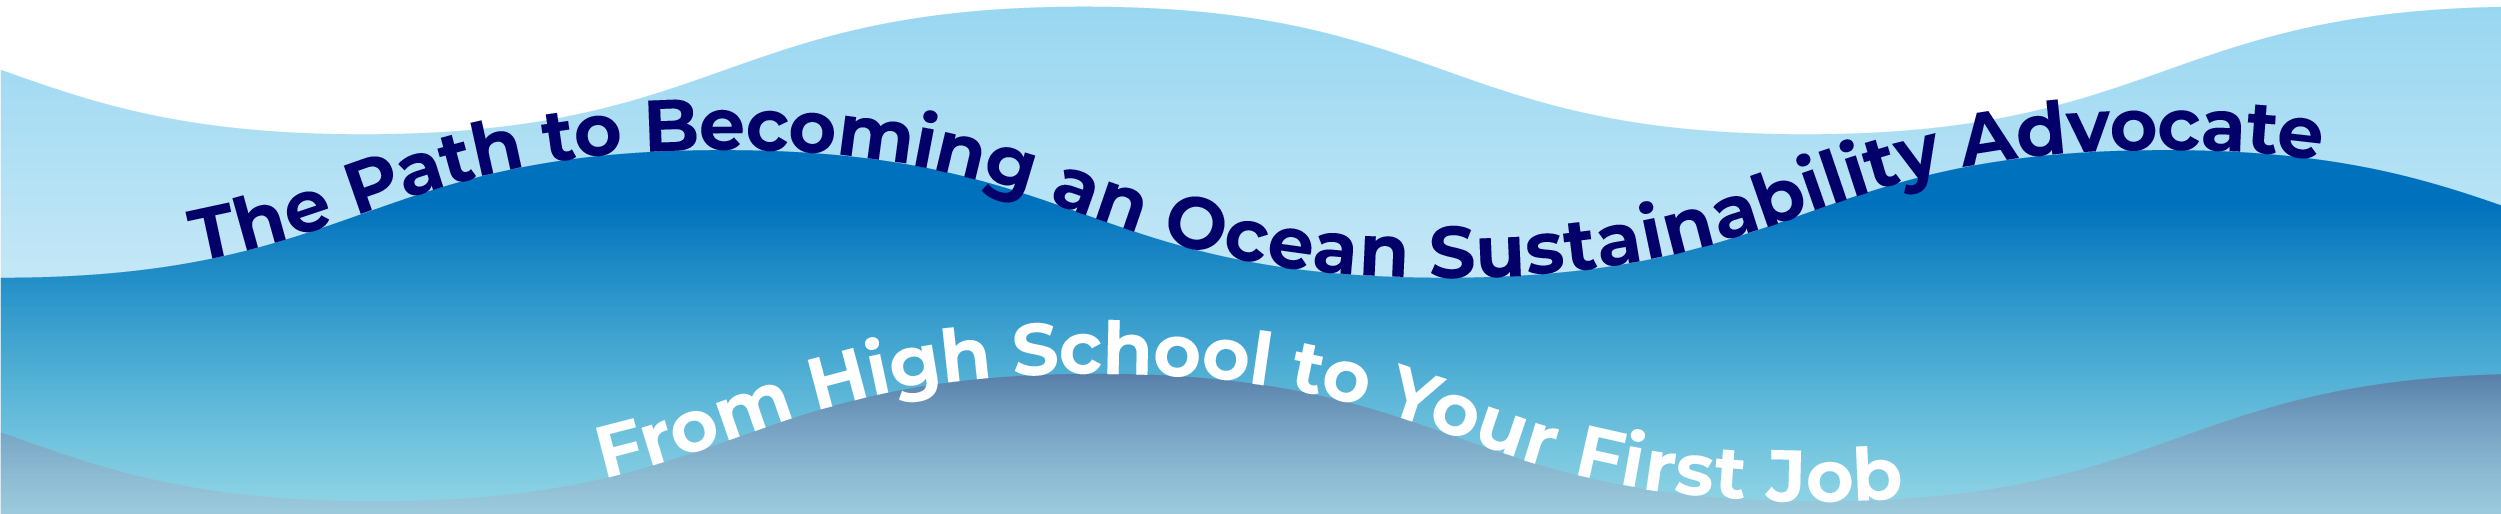 The path to becoming an Ocean Sustainability Advocate